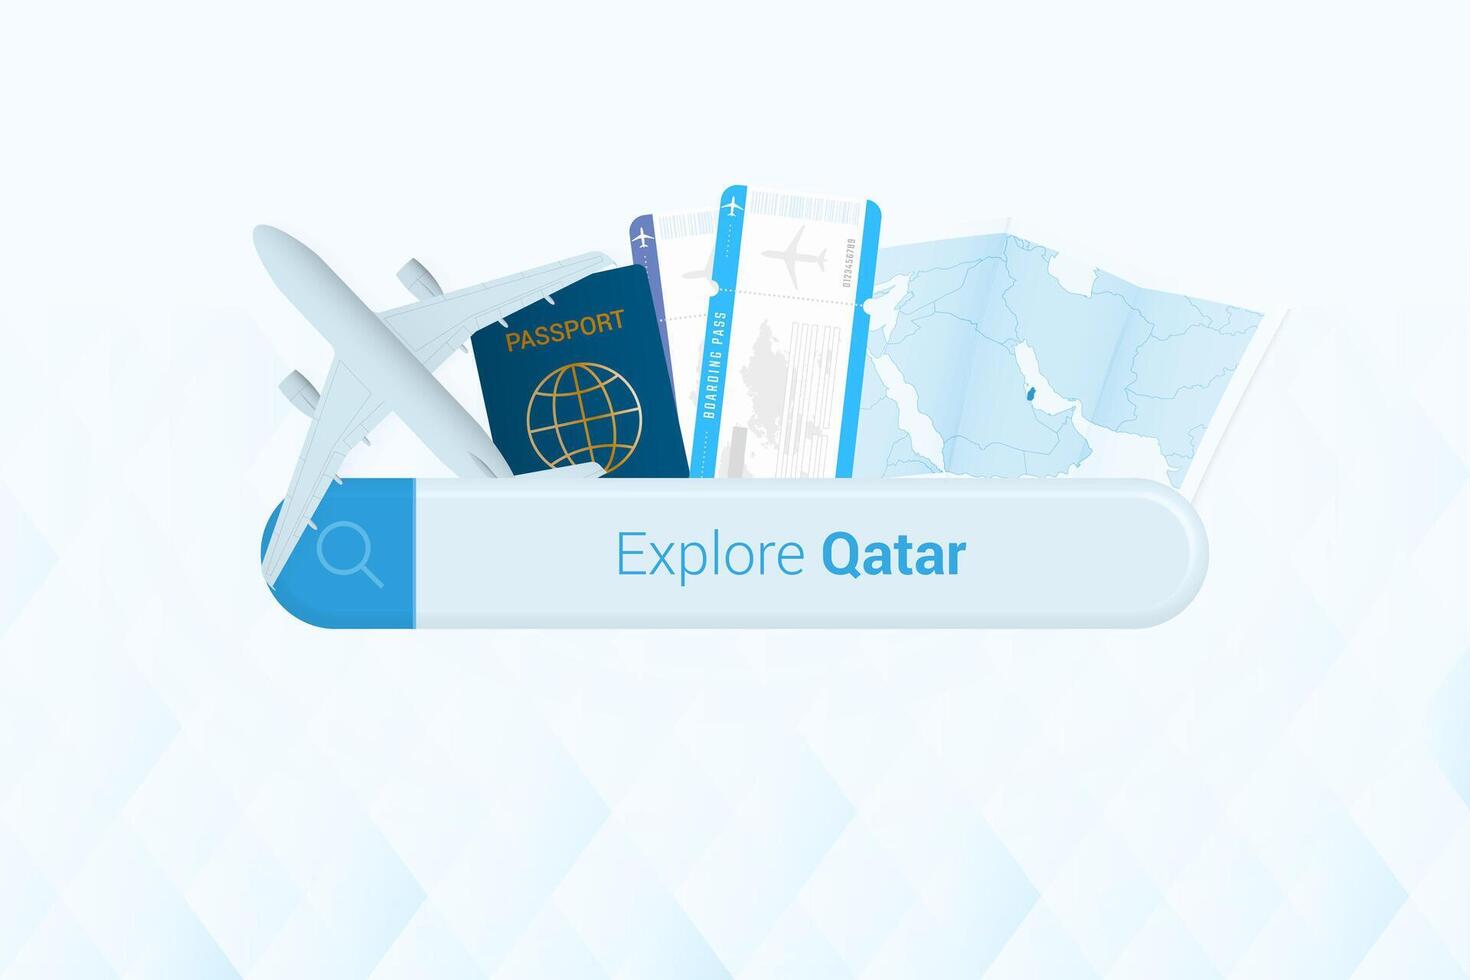 Searching tickets to Qatar or travel destination in Qatar. Searching bar with airplane, passport, boarding pass, tickets and map. vector